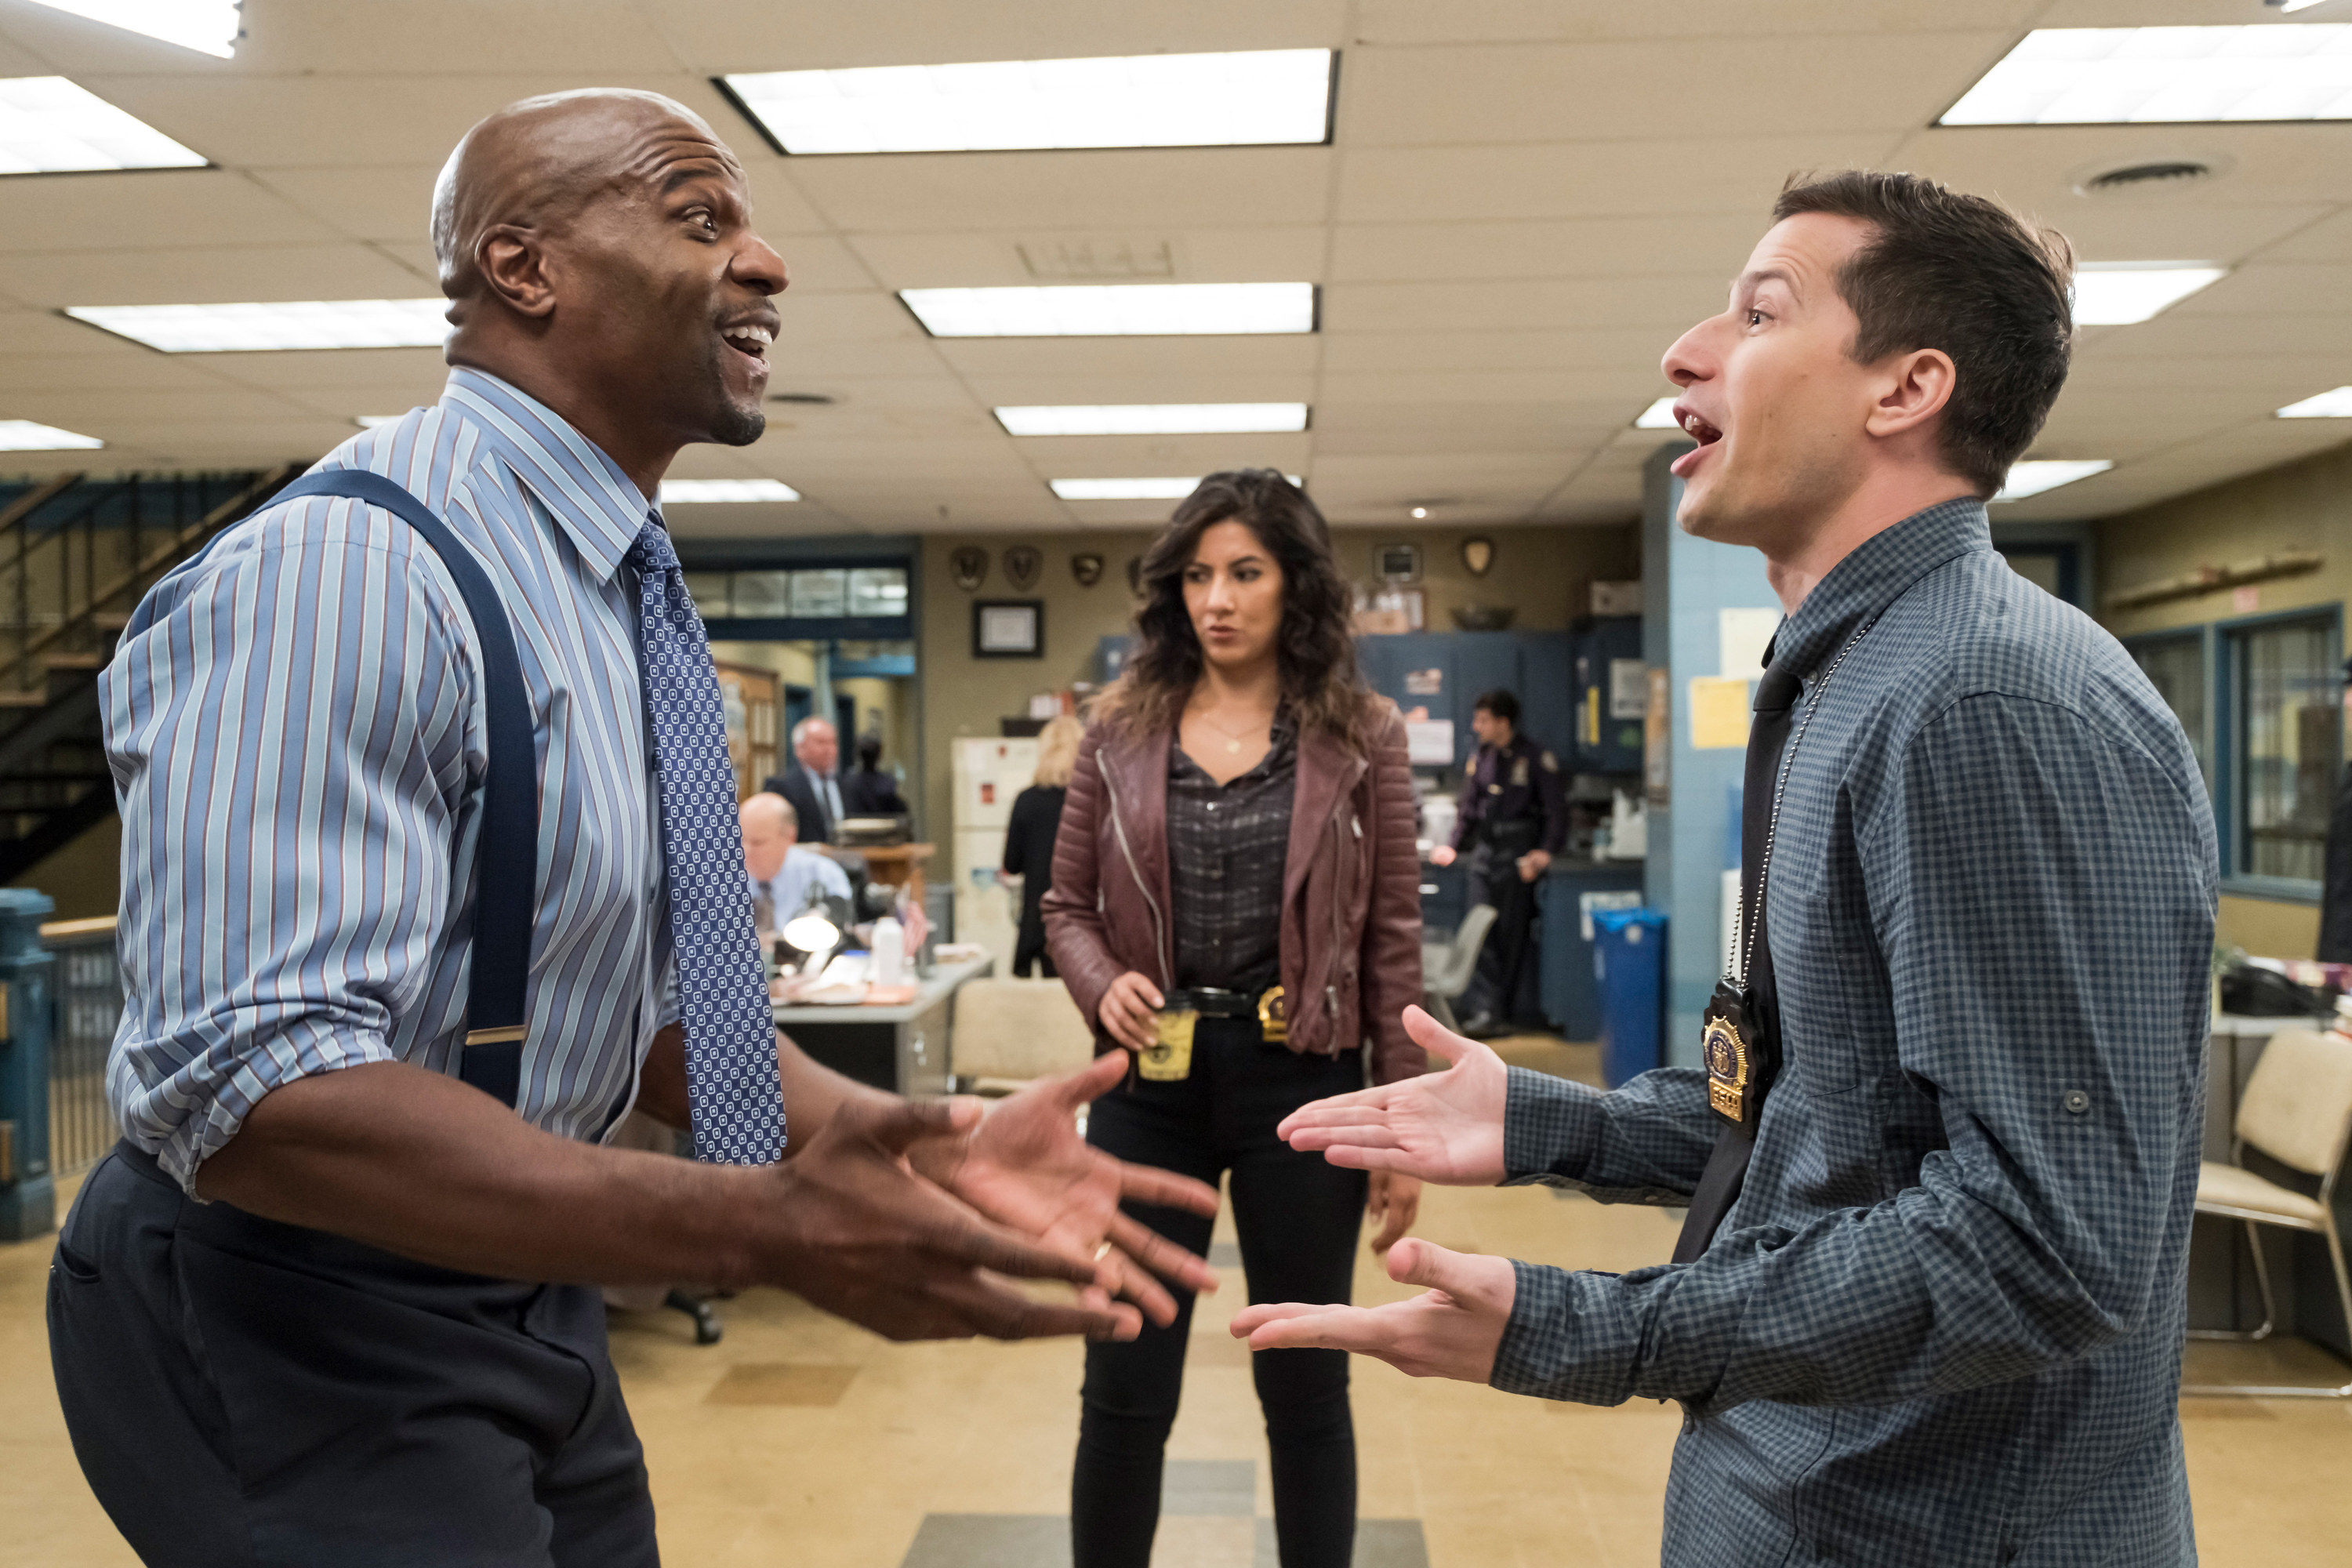 Terry Crews and Andy Samberg argue with Stephanie Beatriz in the background